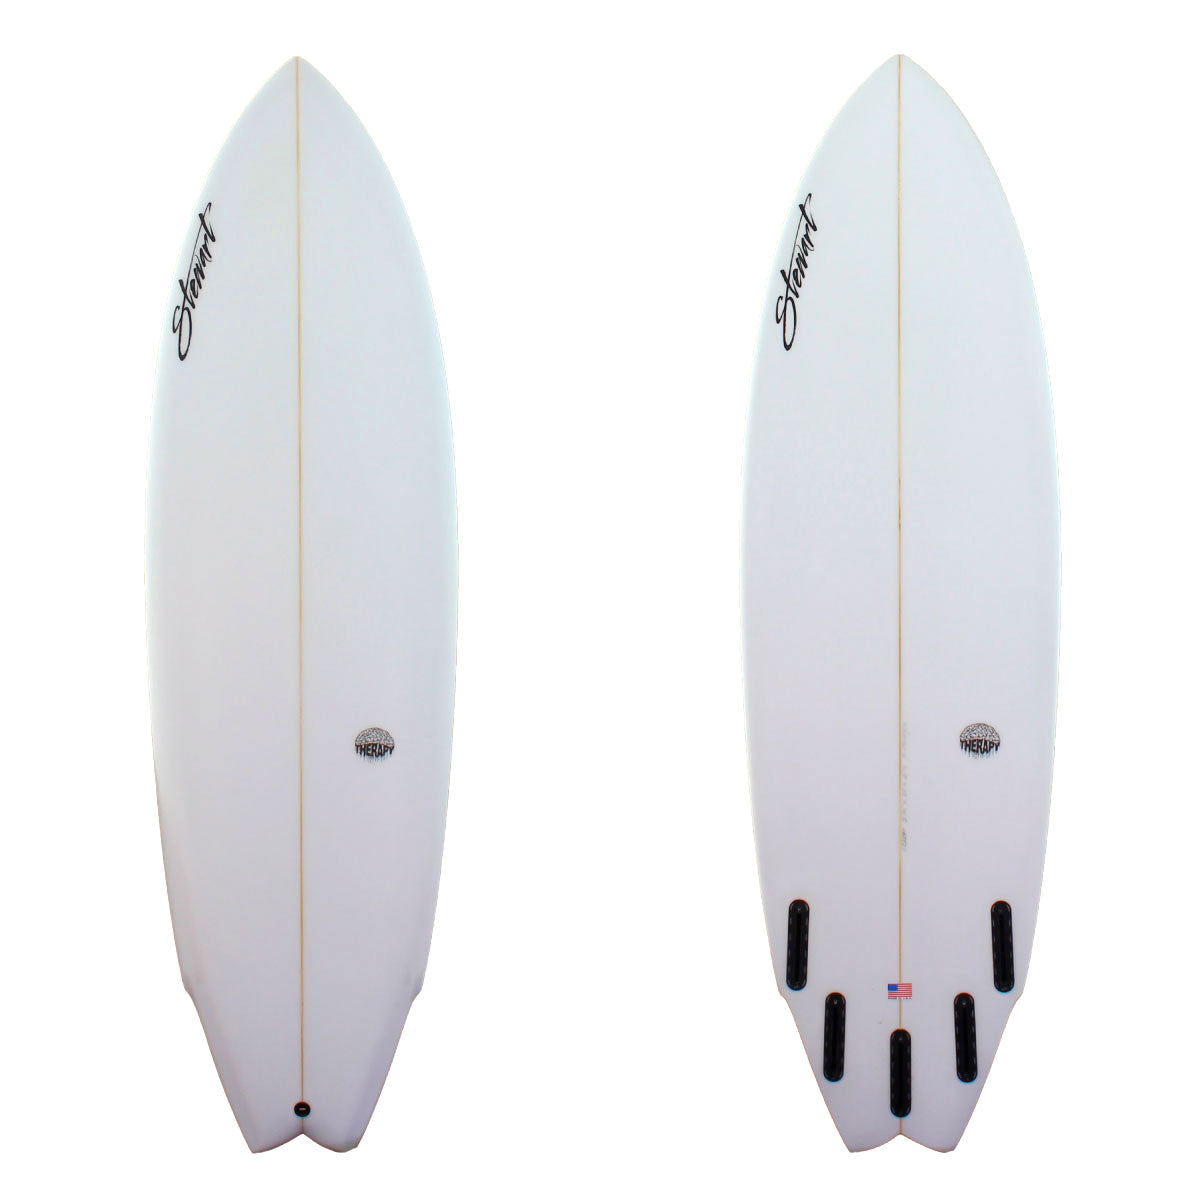 Stewart Surfboards 5'10" Therapy shortboard with clear white deck and bottom